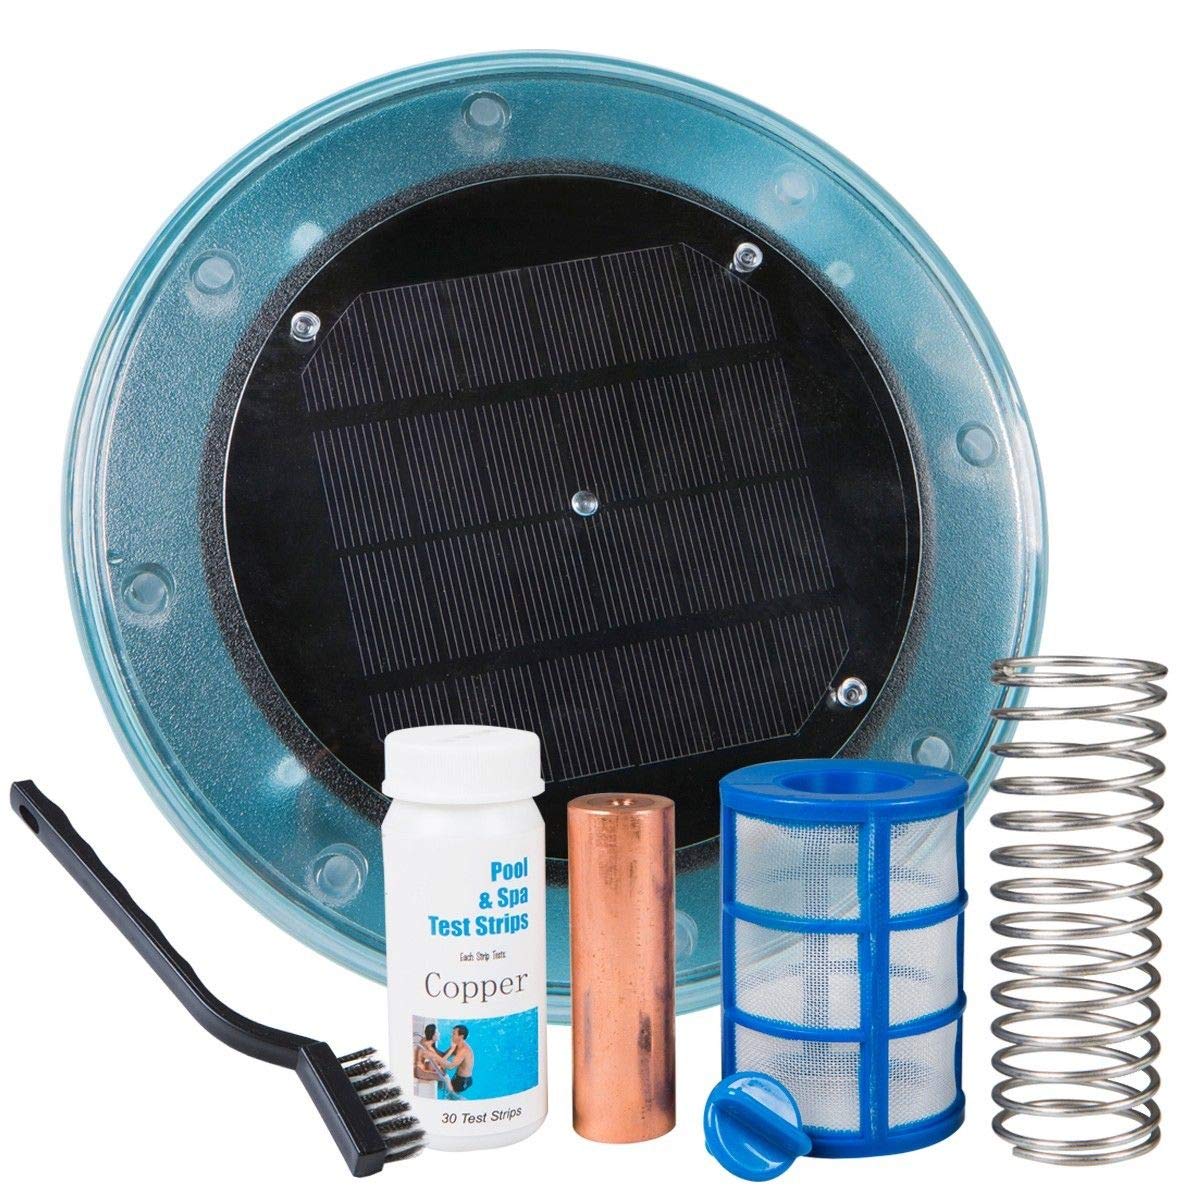 XtremepowerUS 90120-1 Purifier Pool Solar Ionizer System Effective up to 32,000 Gallons Reduces Chlorine Algae, Blue